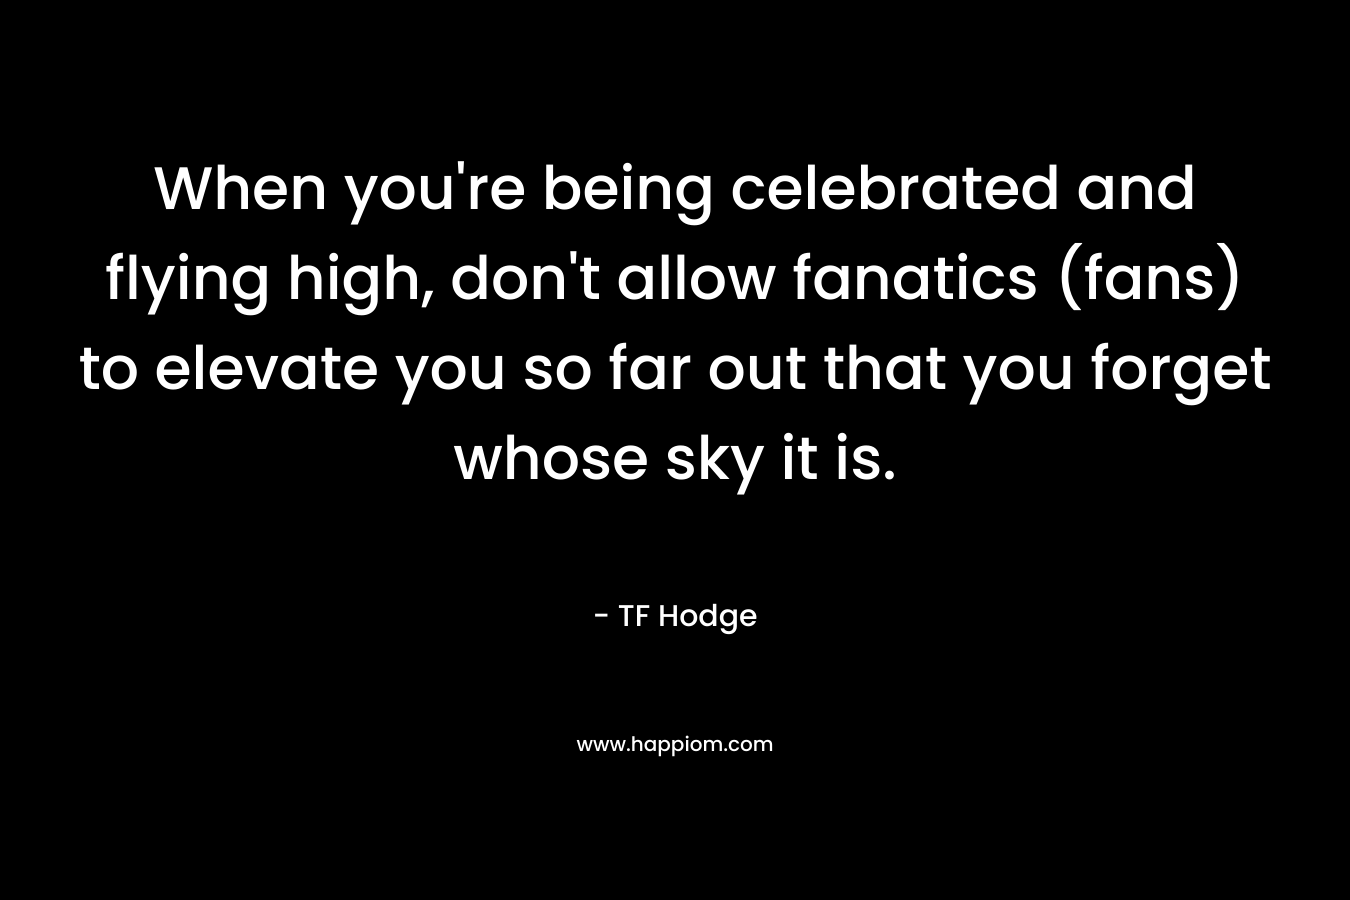 When you’re being celebrated and flying high, don’t allow fanatics (fans) to elevate you so far out that you forget whose sky it is. – TF Hodge